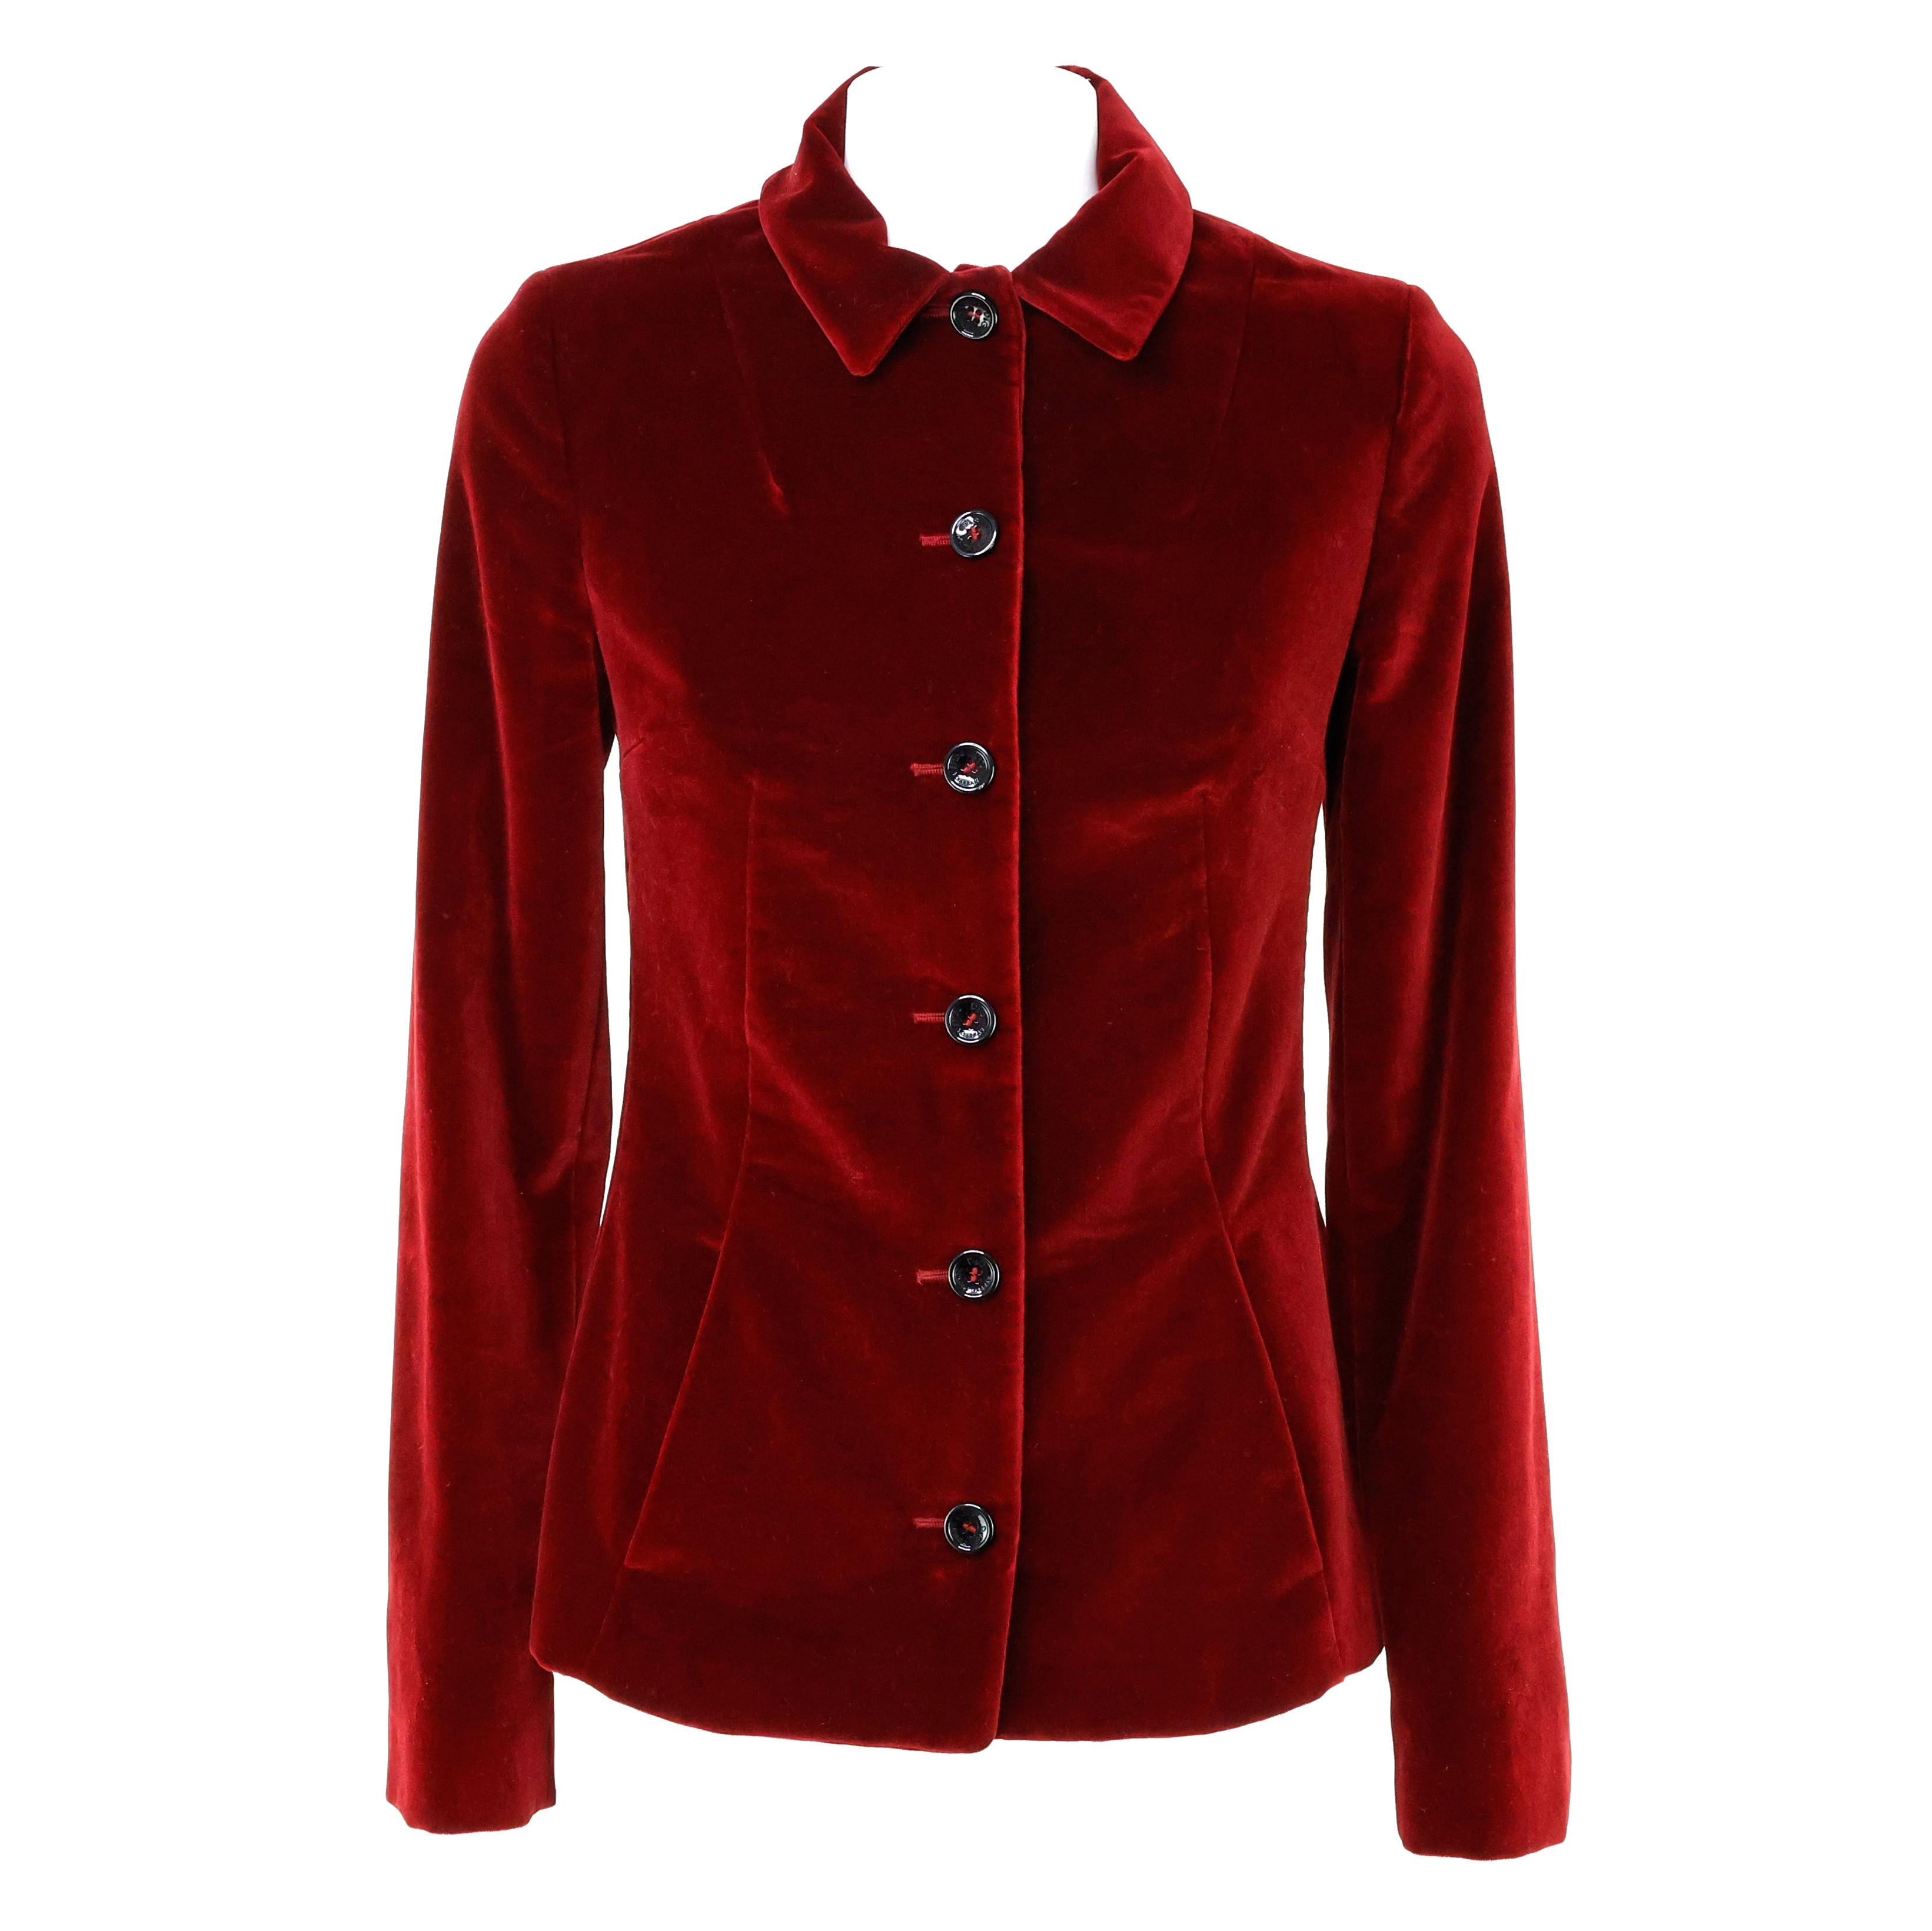 Dolce e Gabbana jacket in velvet color red / bordeaux. Size 40 IT.


Condition:
Really good.